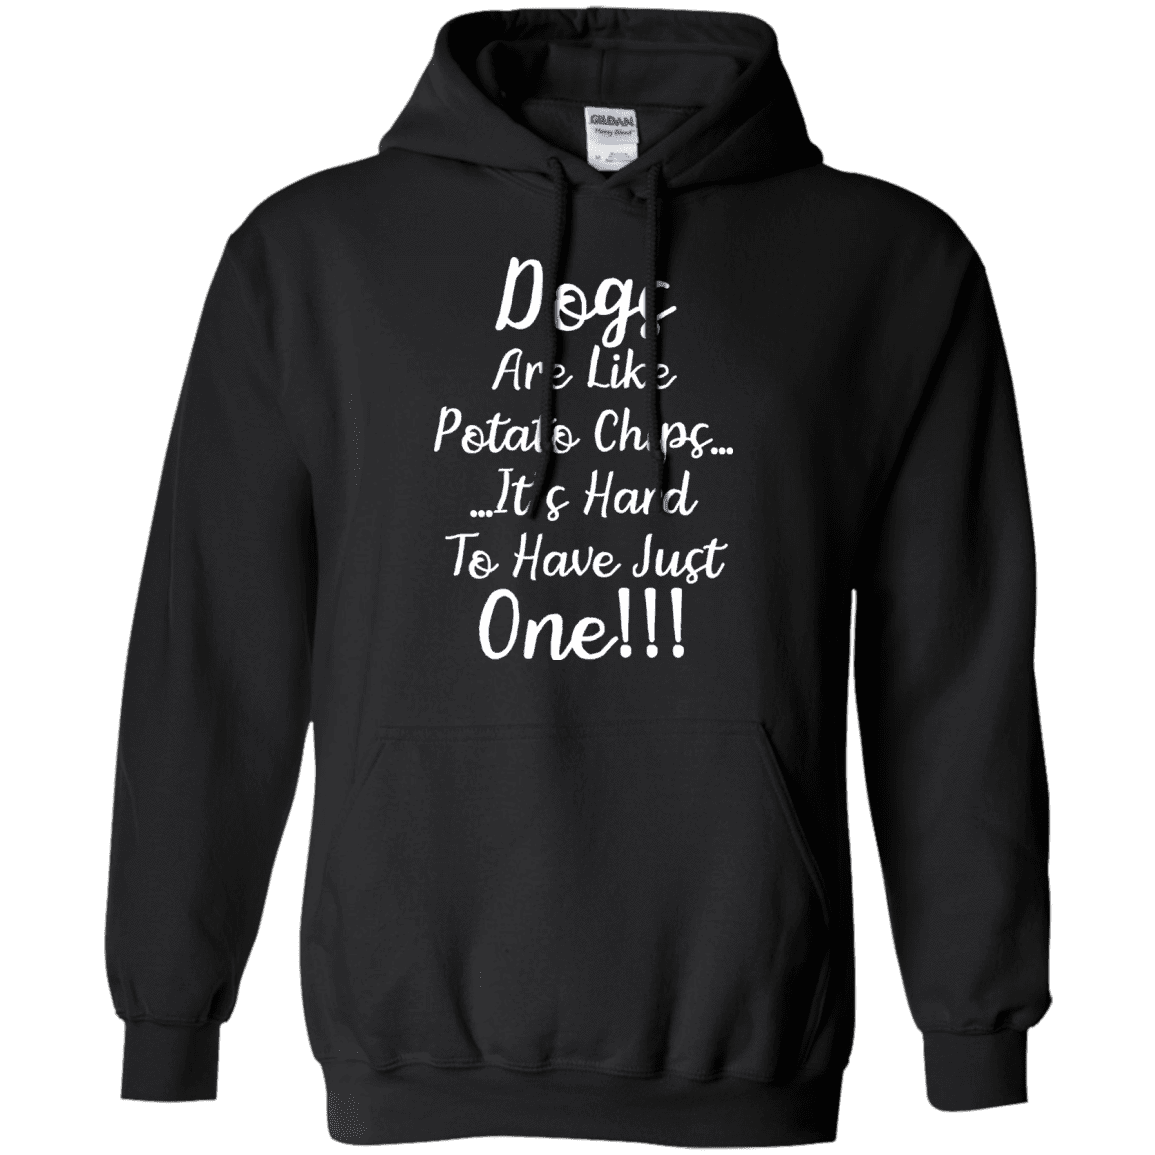 Dogs Are Like Potato Chips - Hoodie.